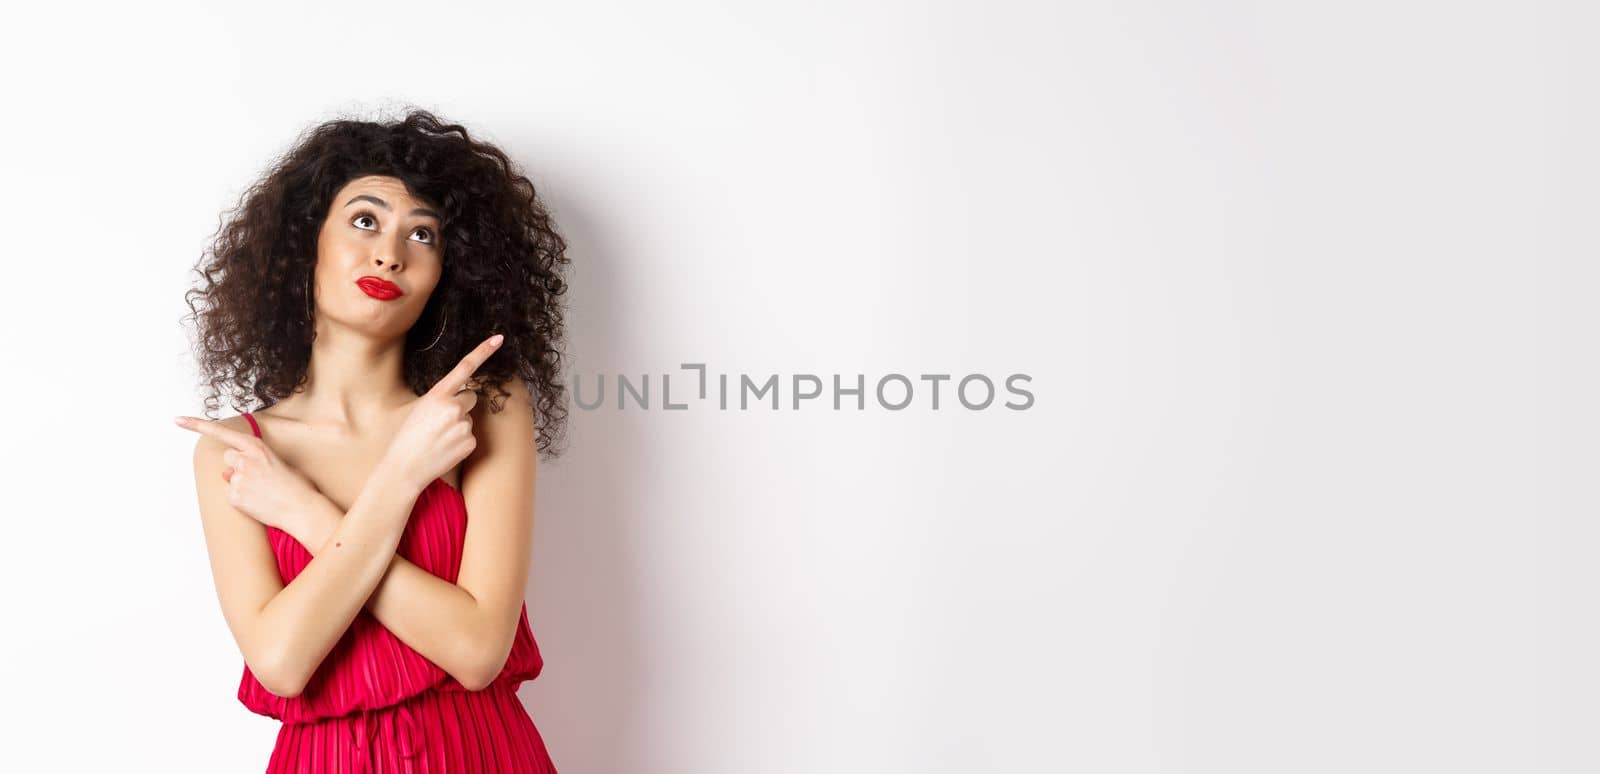 Indecisive silly woman in red dress, cross fingers and pointing sideways, looking up pensive, making choice, standing over white background by Benzoix